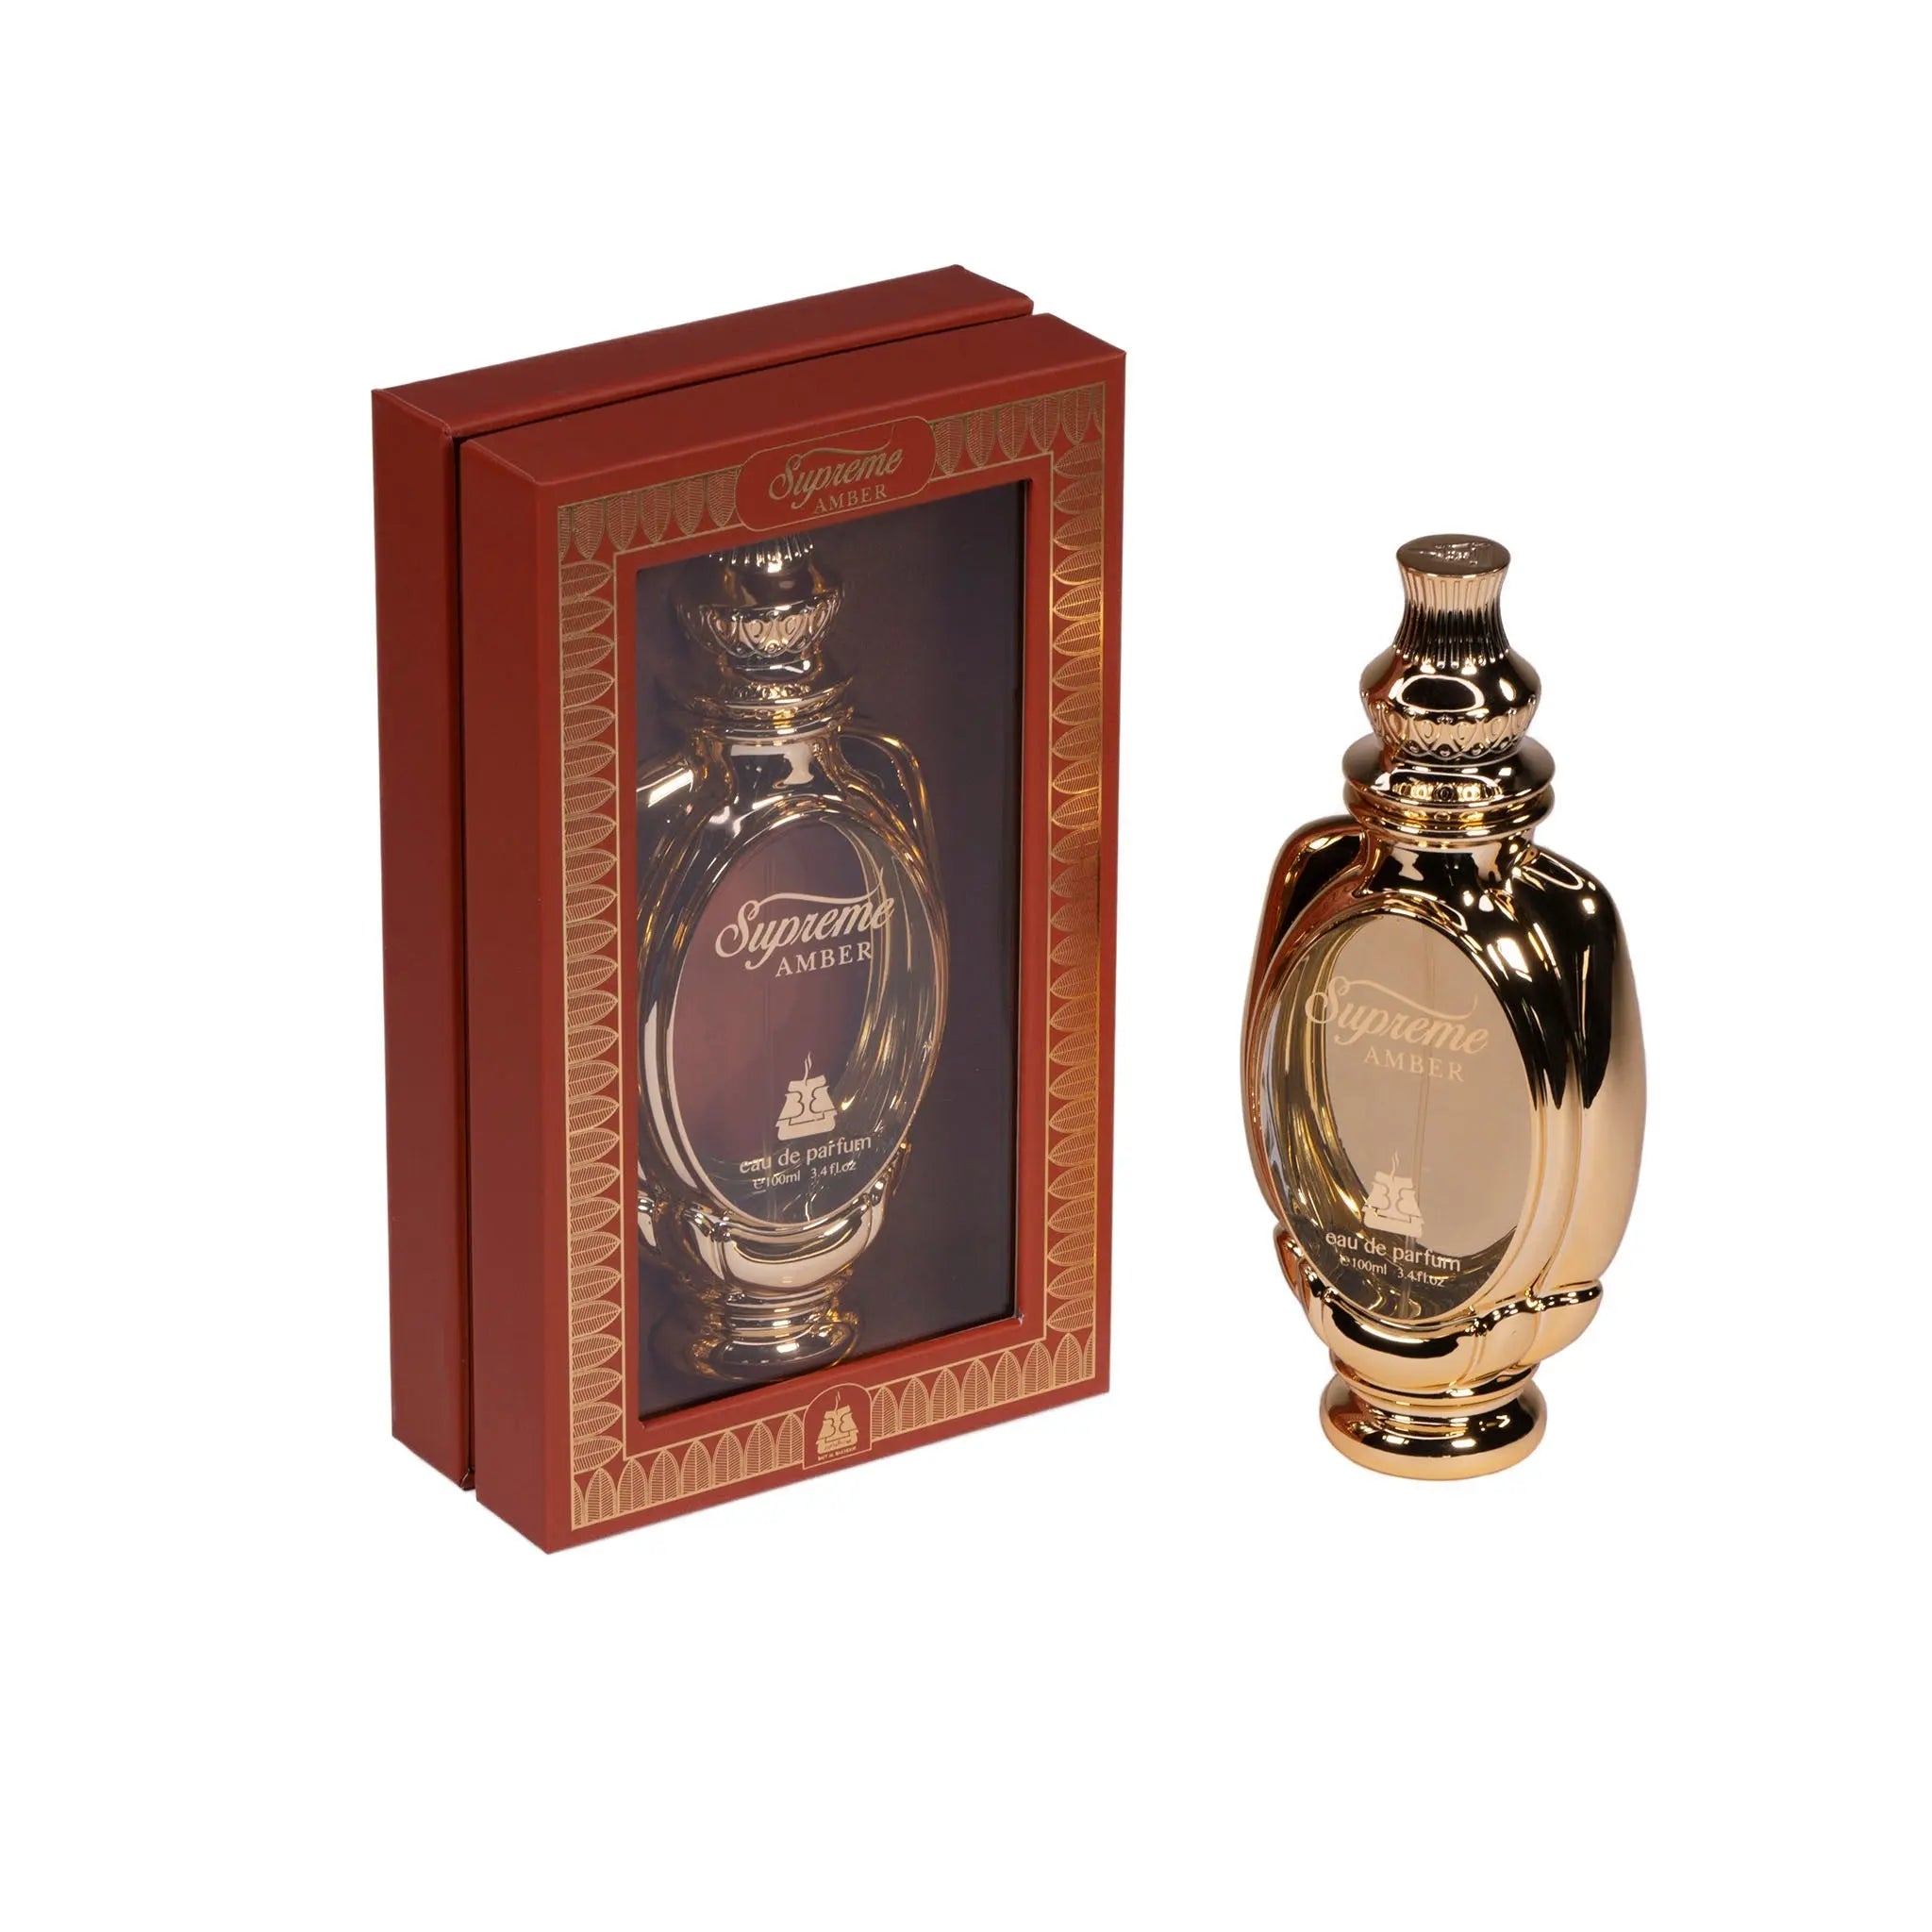 The image showcases an elegant perfume set that includes a glossy, golden-brown perfume bottle and its packaging. The bottle has a classic, curvaceous form with a polished, reflective finish and a decorative cap featuring intricate patterns. Beside it, a rectangular red box with golden geometric and ornamental designs displays a clear window through which a similar perfume bottle is visible.